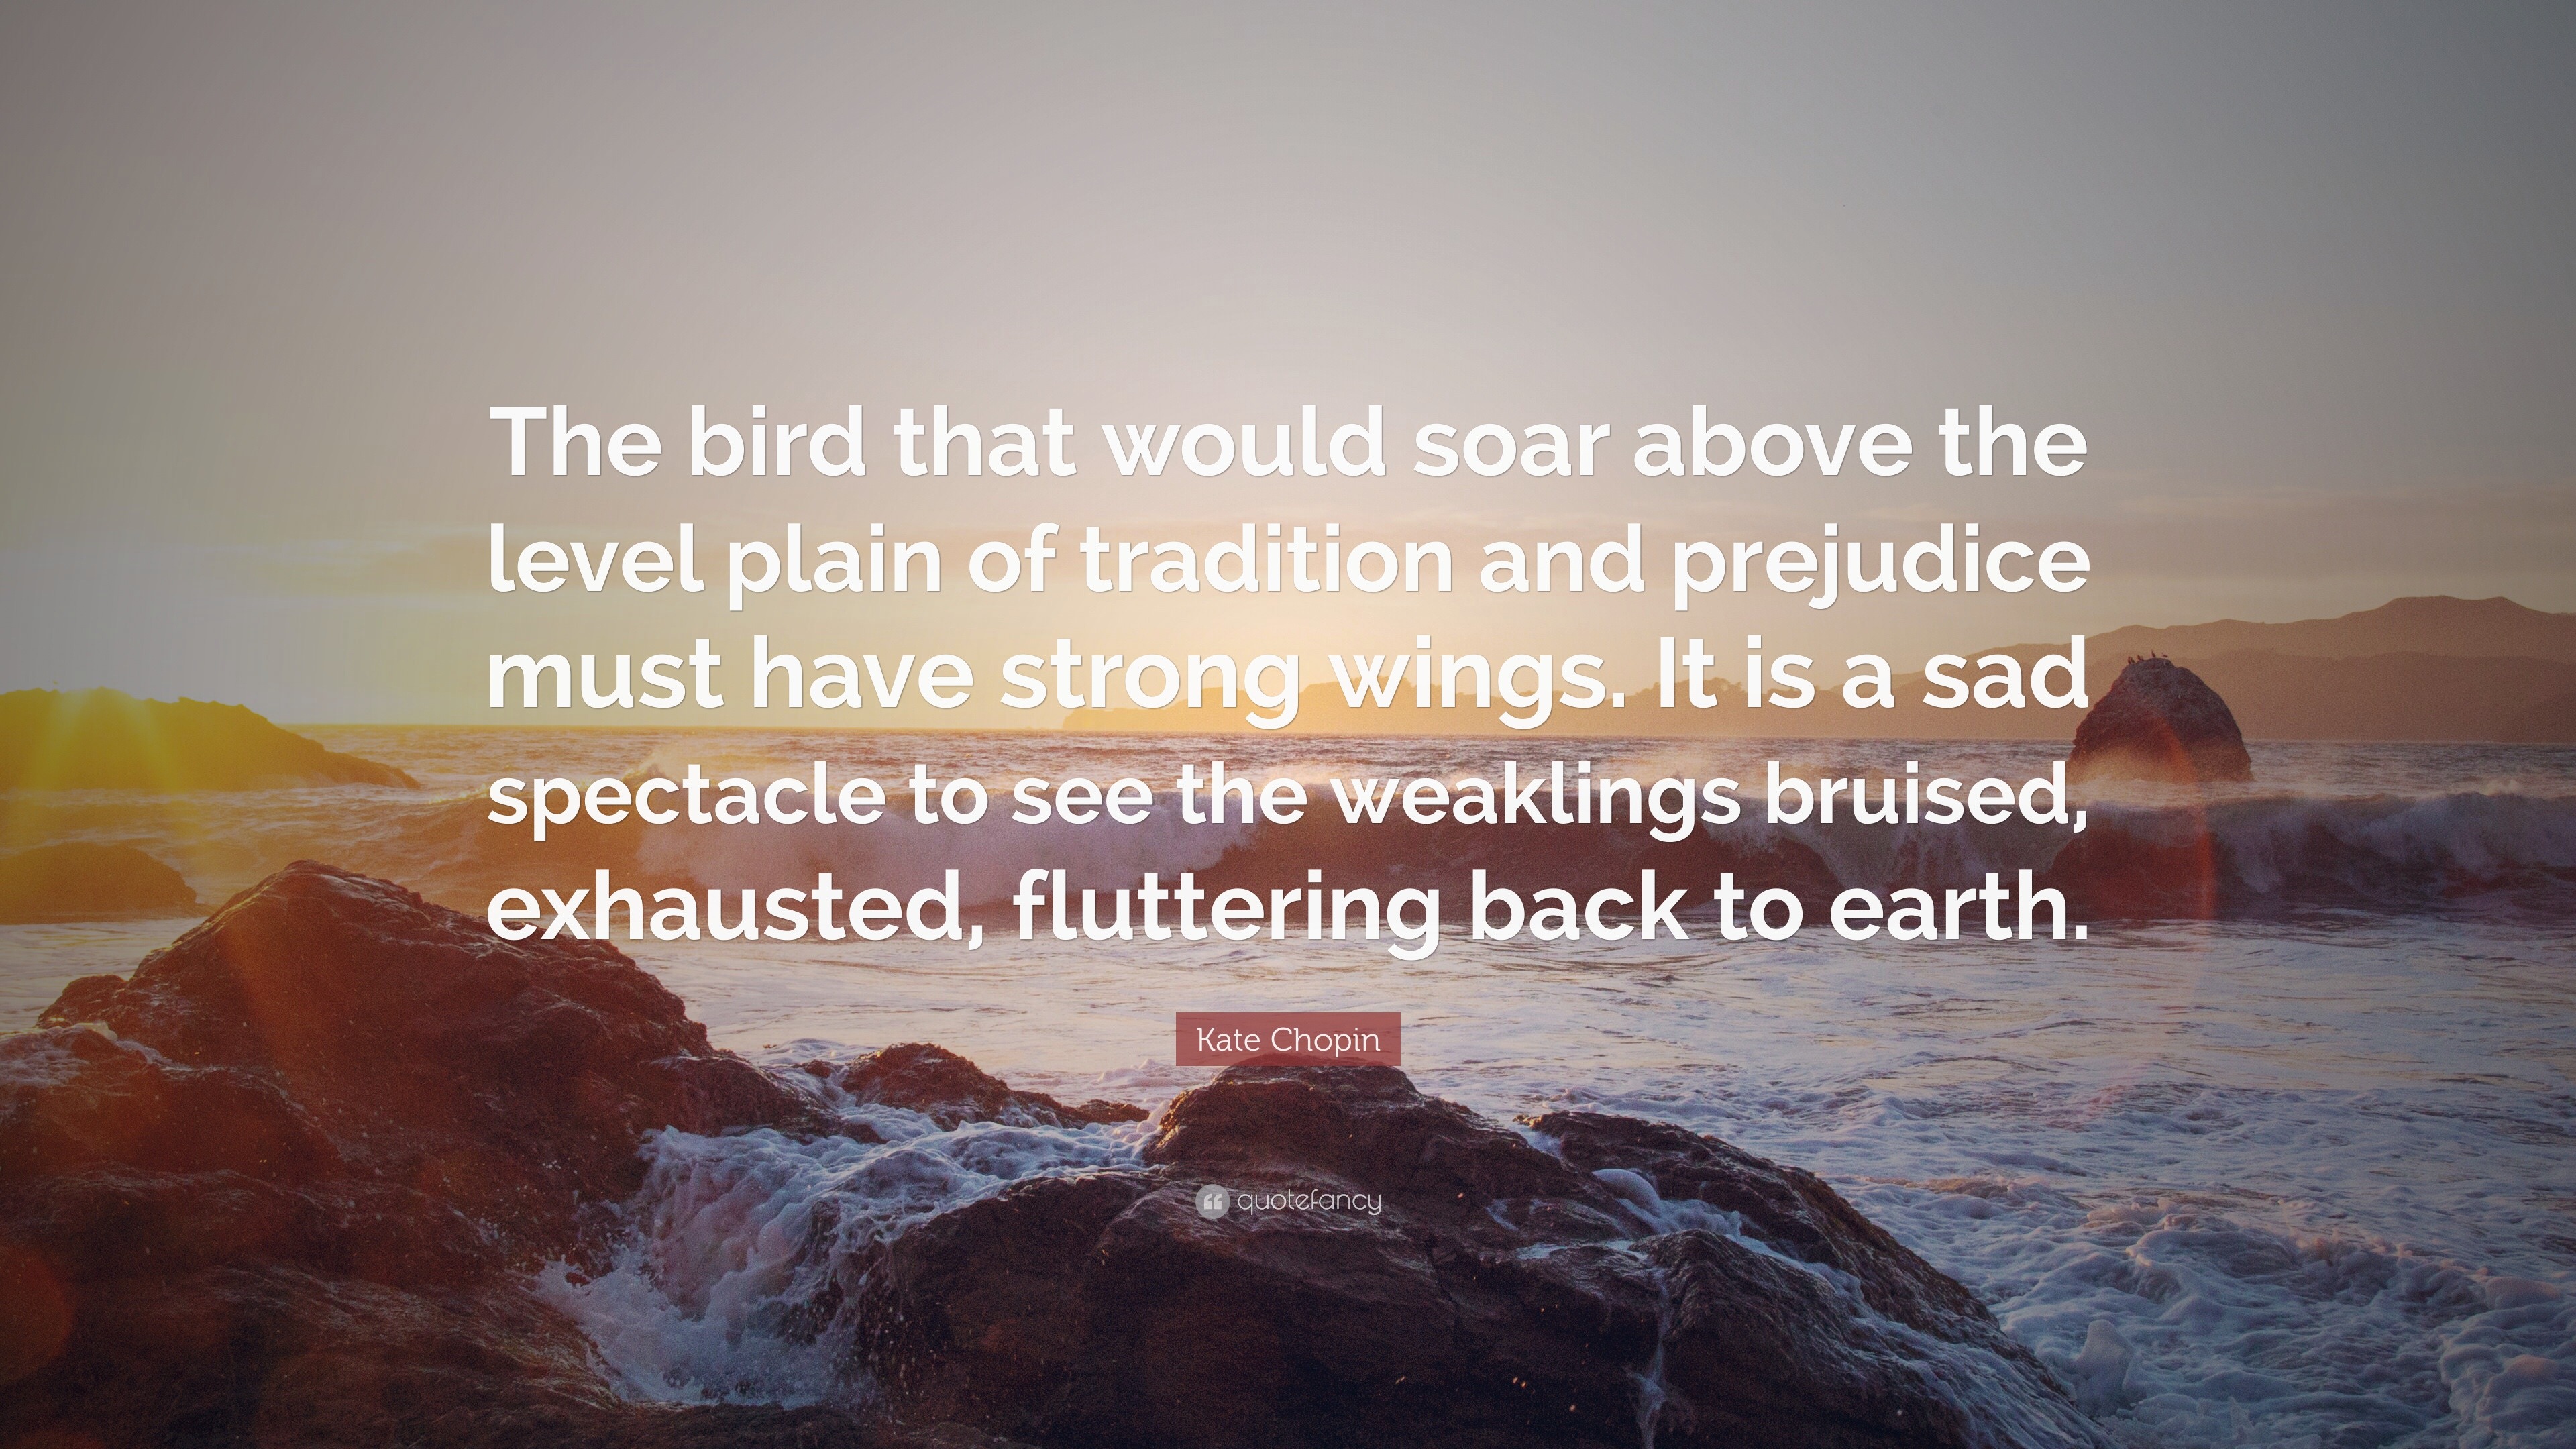 Kate Chopin Quote: “The bird that would soar above the level plain of ...